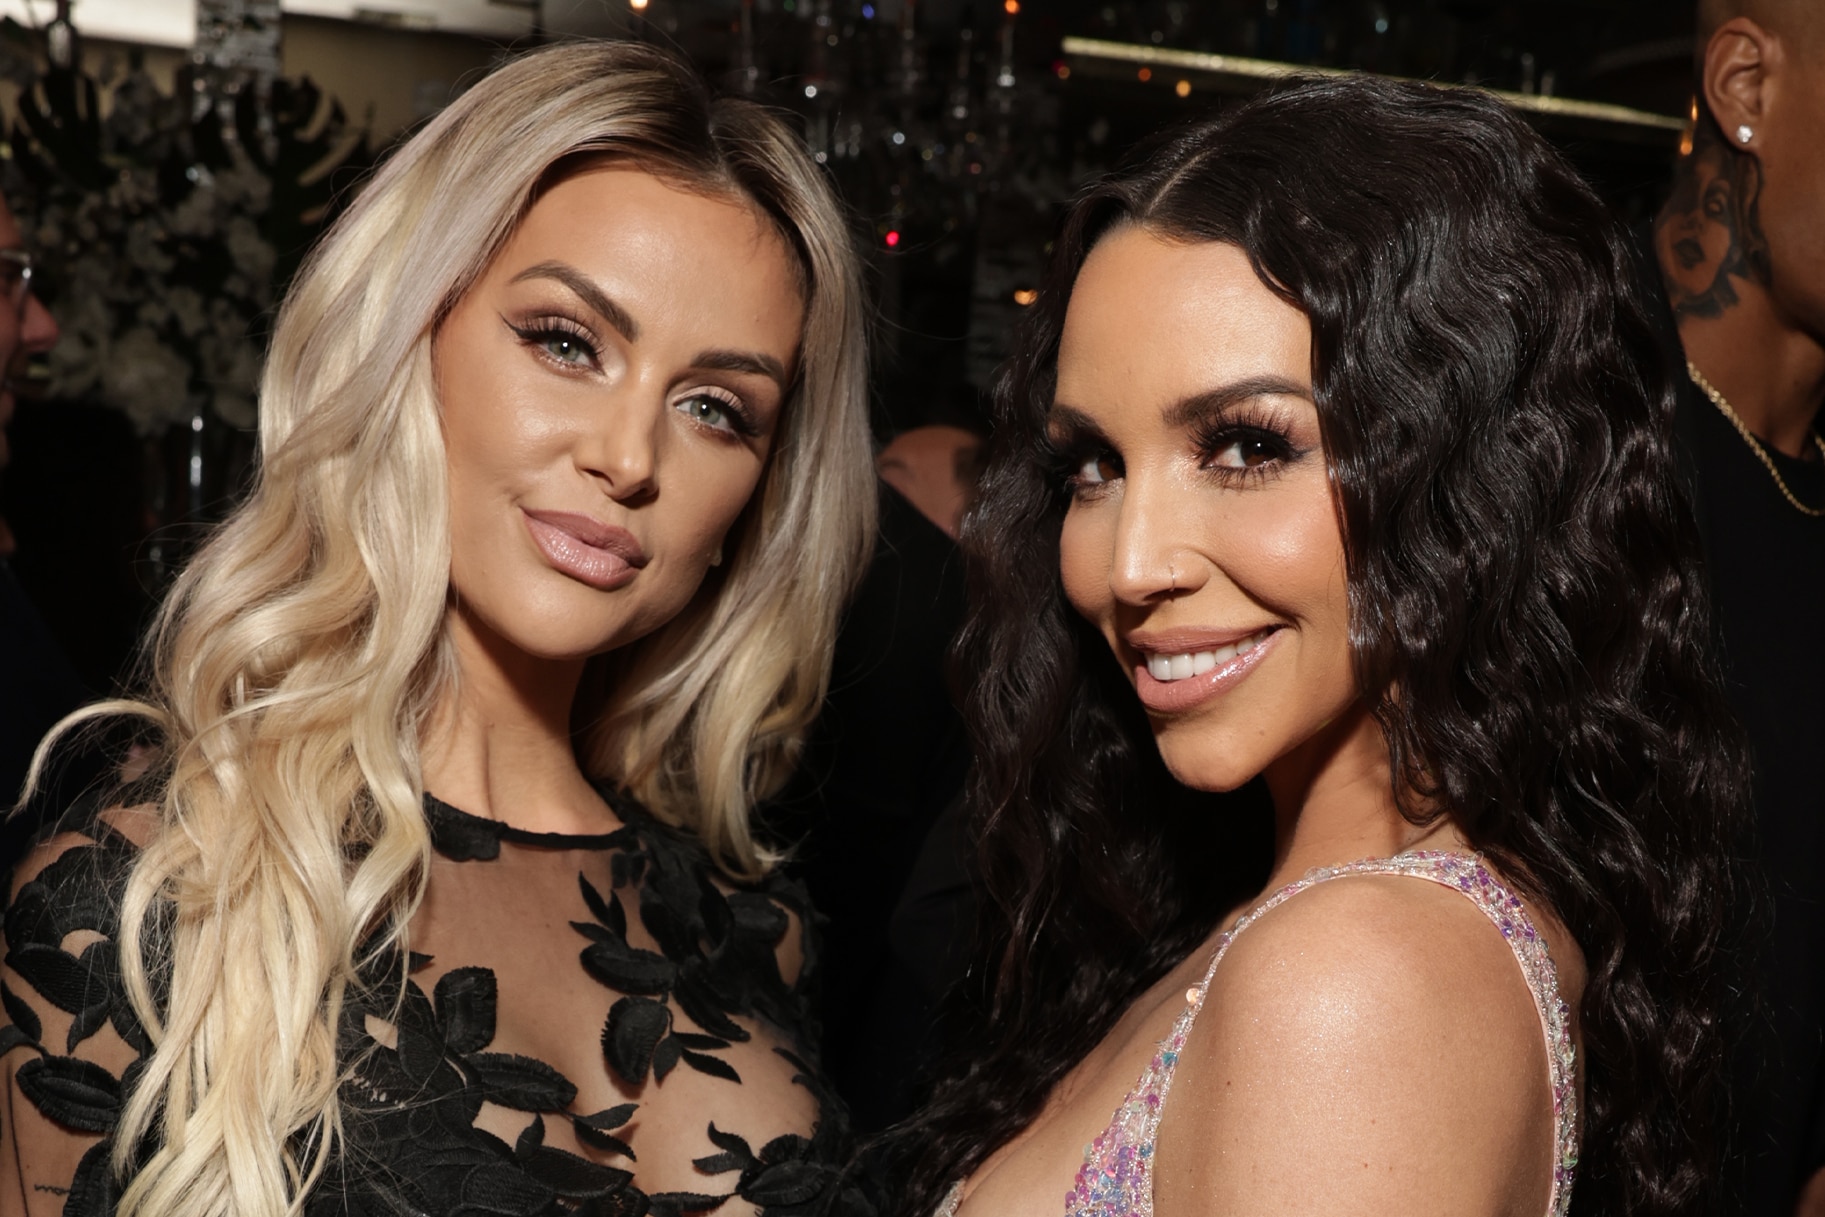 Lala Kent and Scheana Shay at premiere party